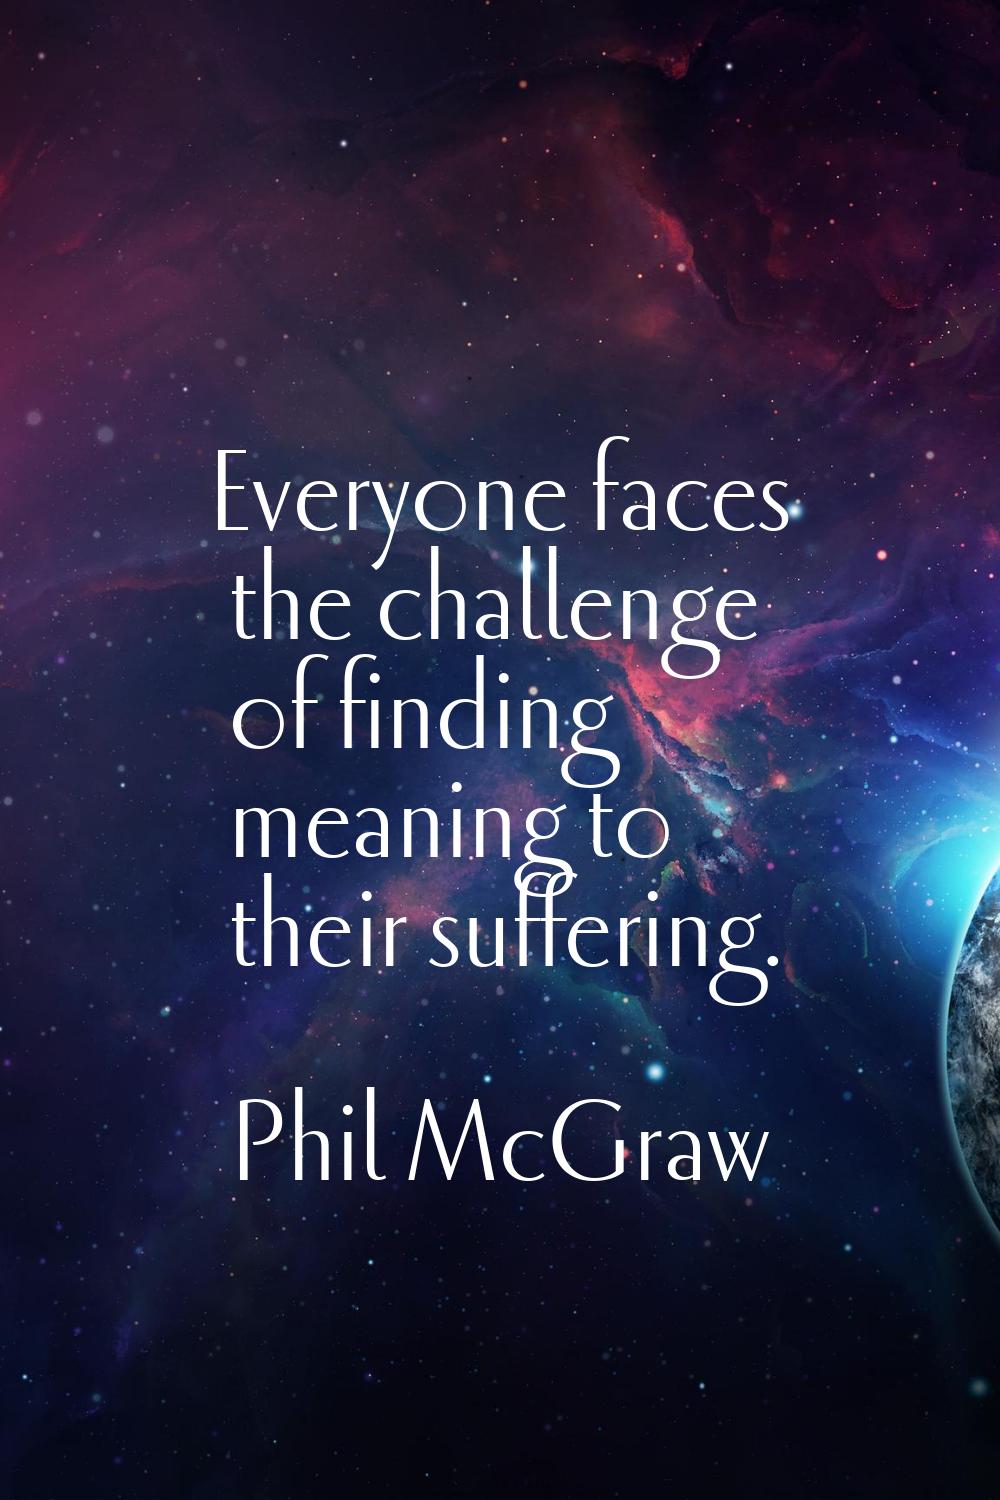 Everyone faces the challenge of finding meaning to their suffering.